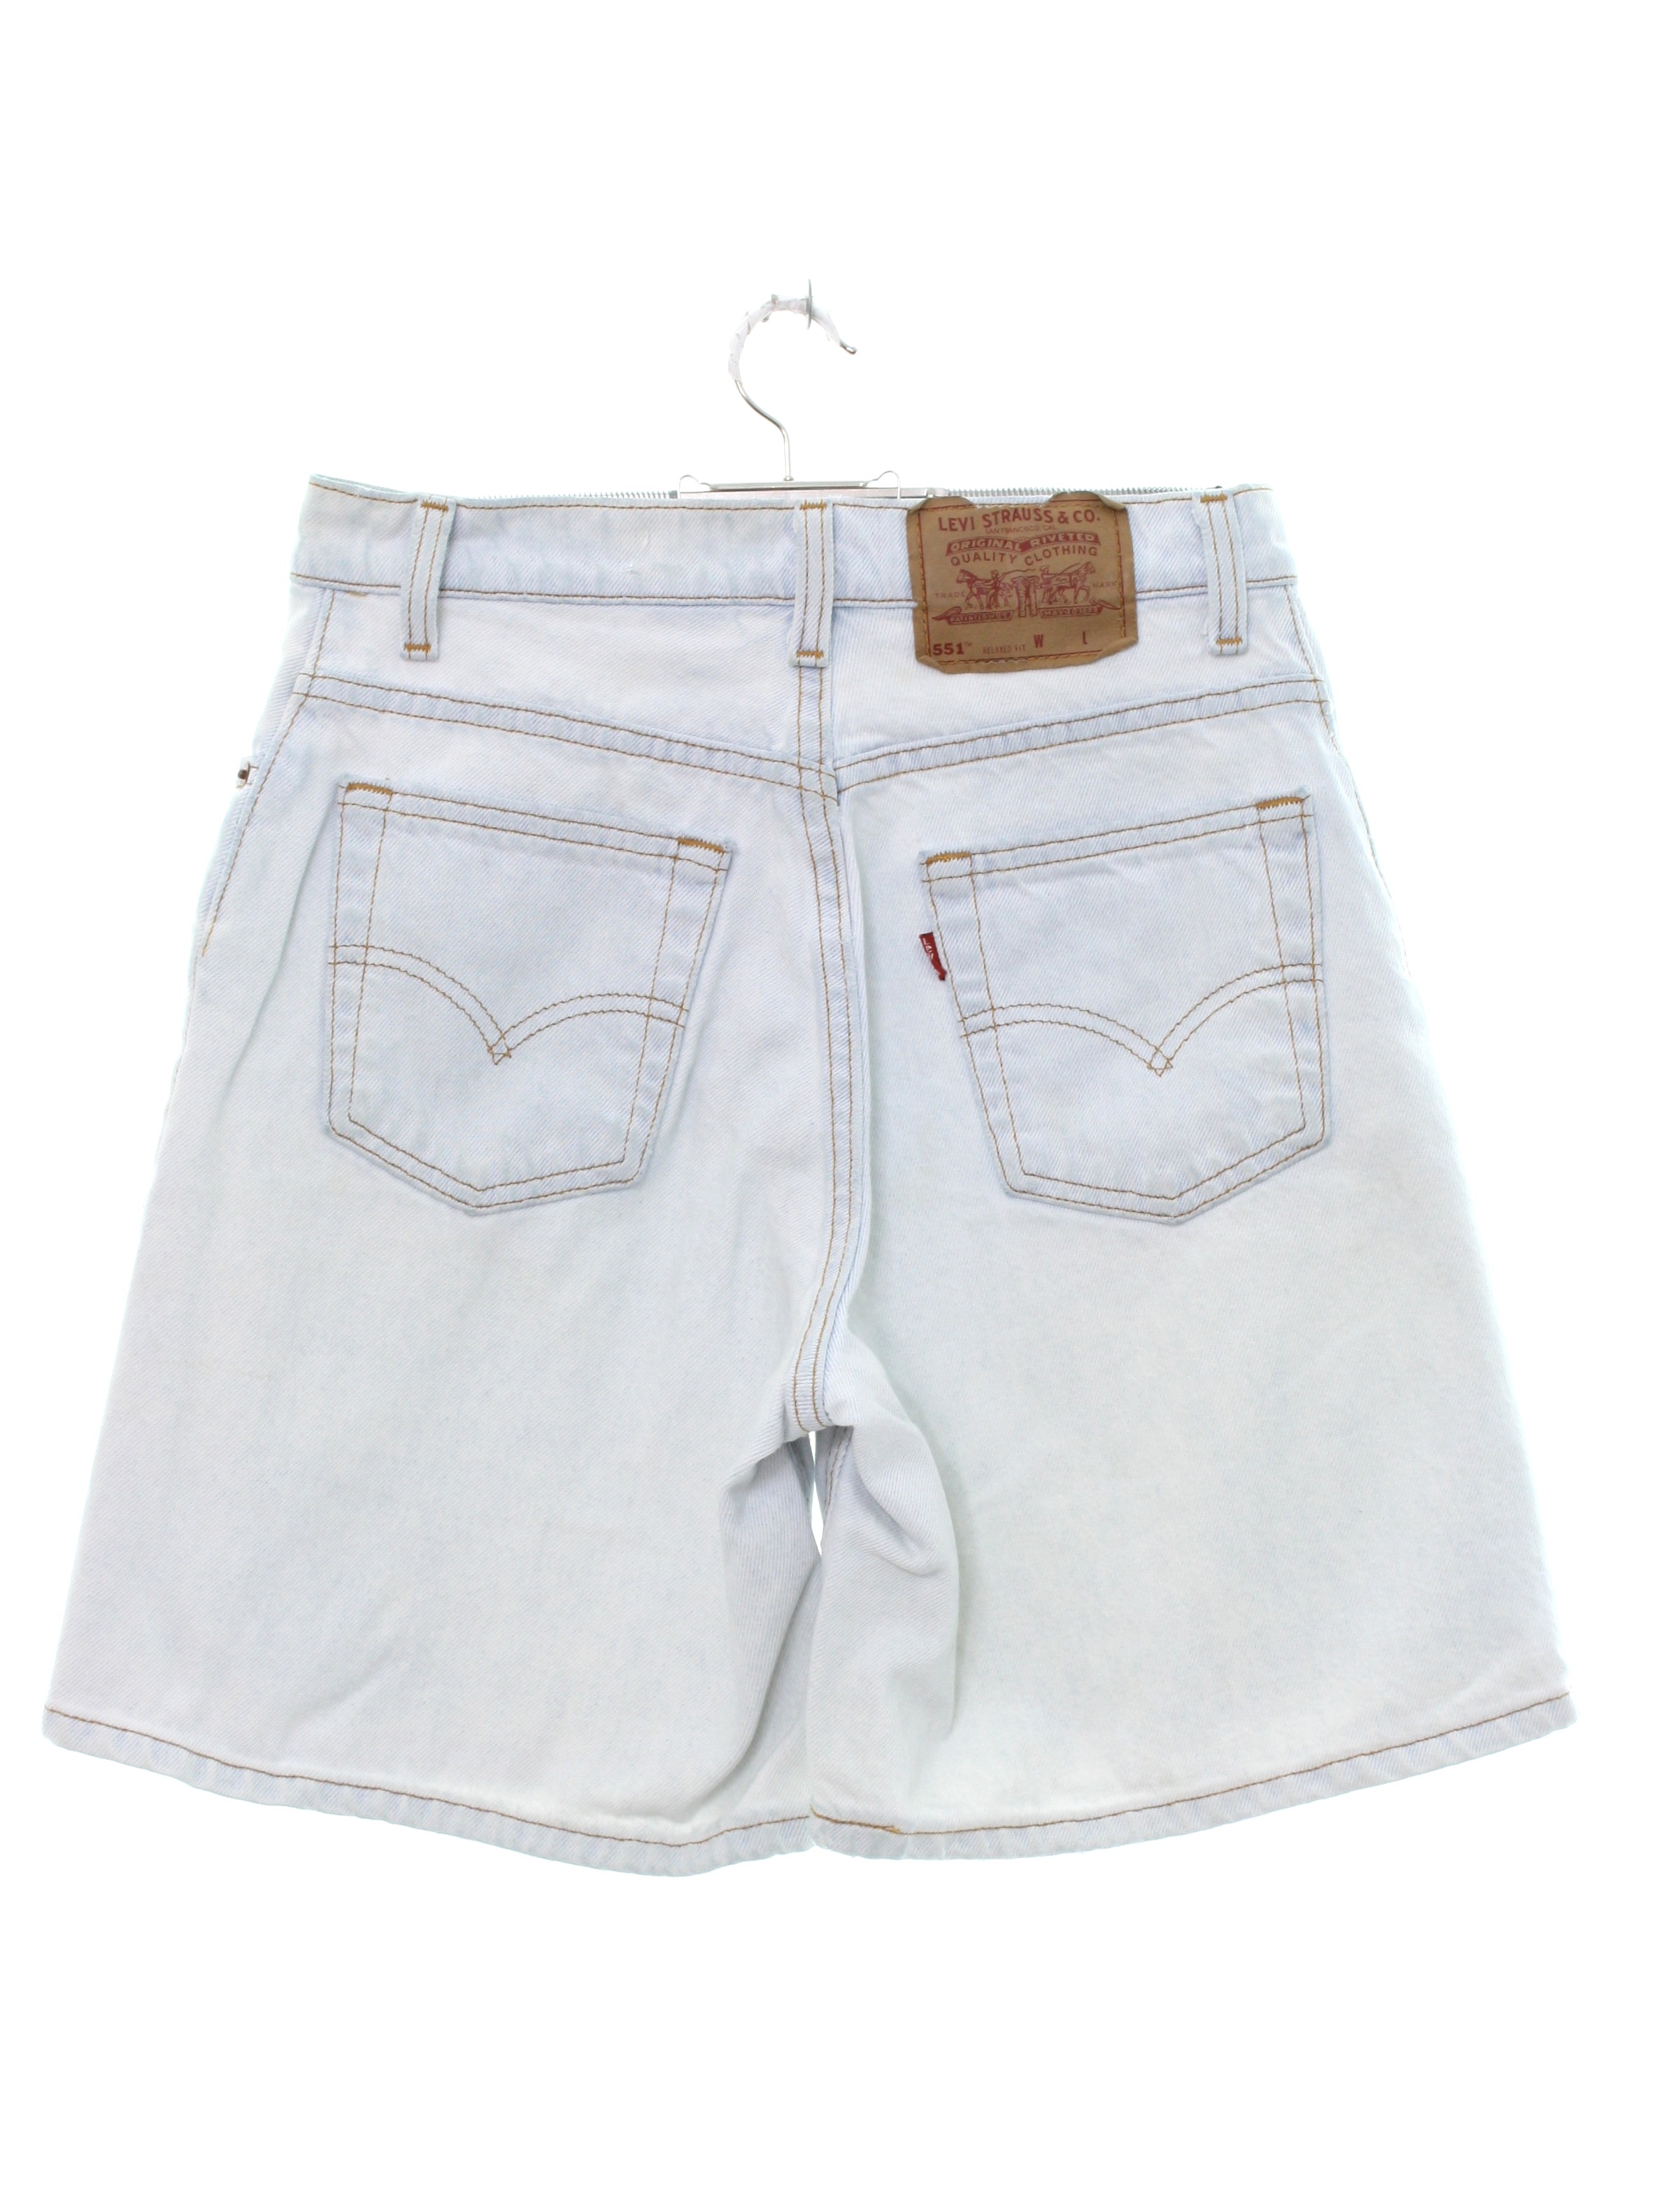 80s Vintage Levis 551 Relaxed Fit Shorts: 80s -Levis 551 Relaxed Fit ...